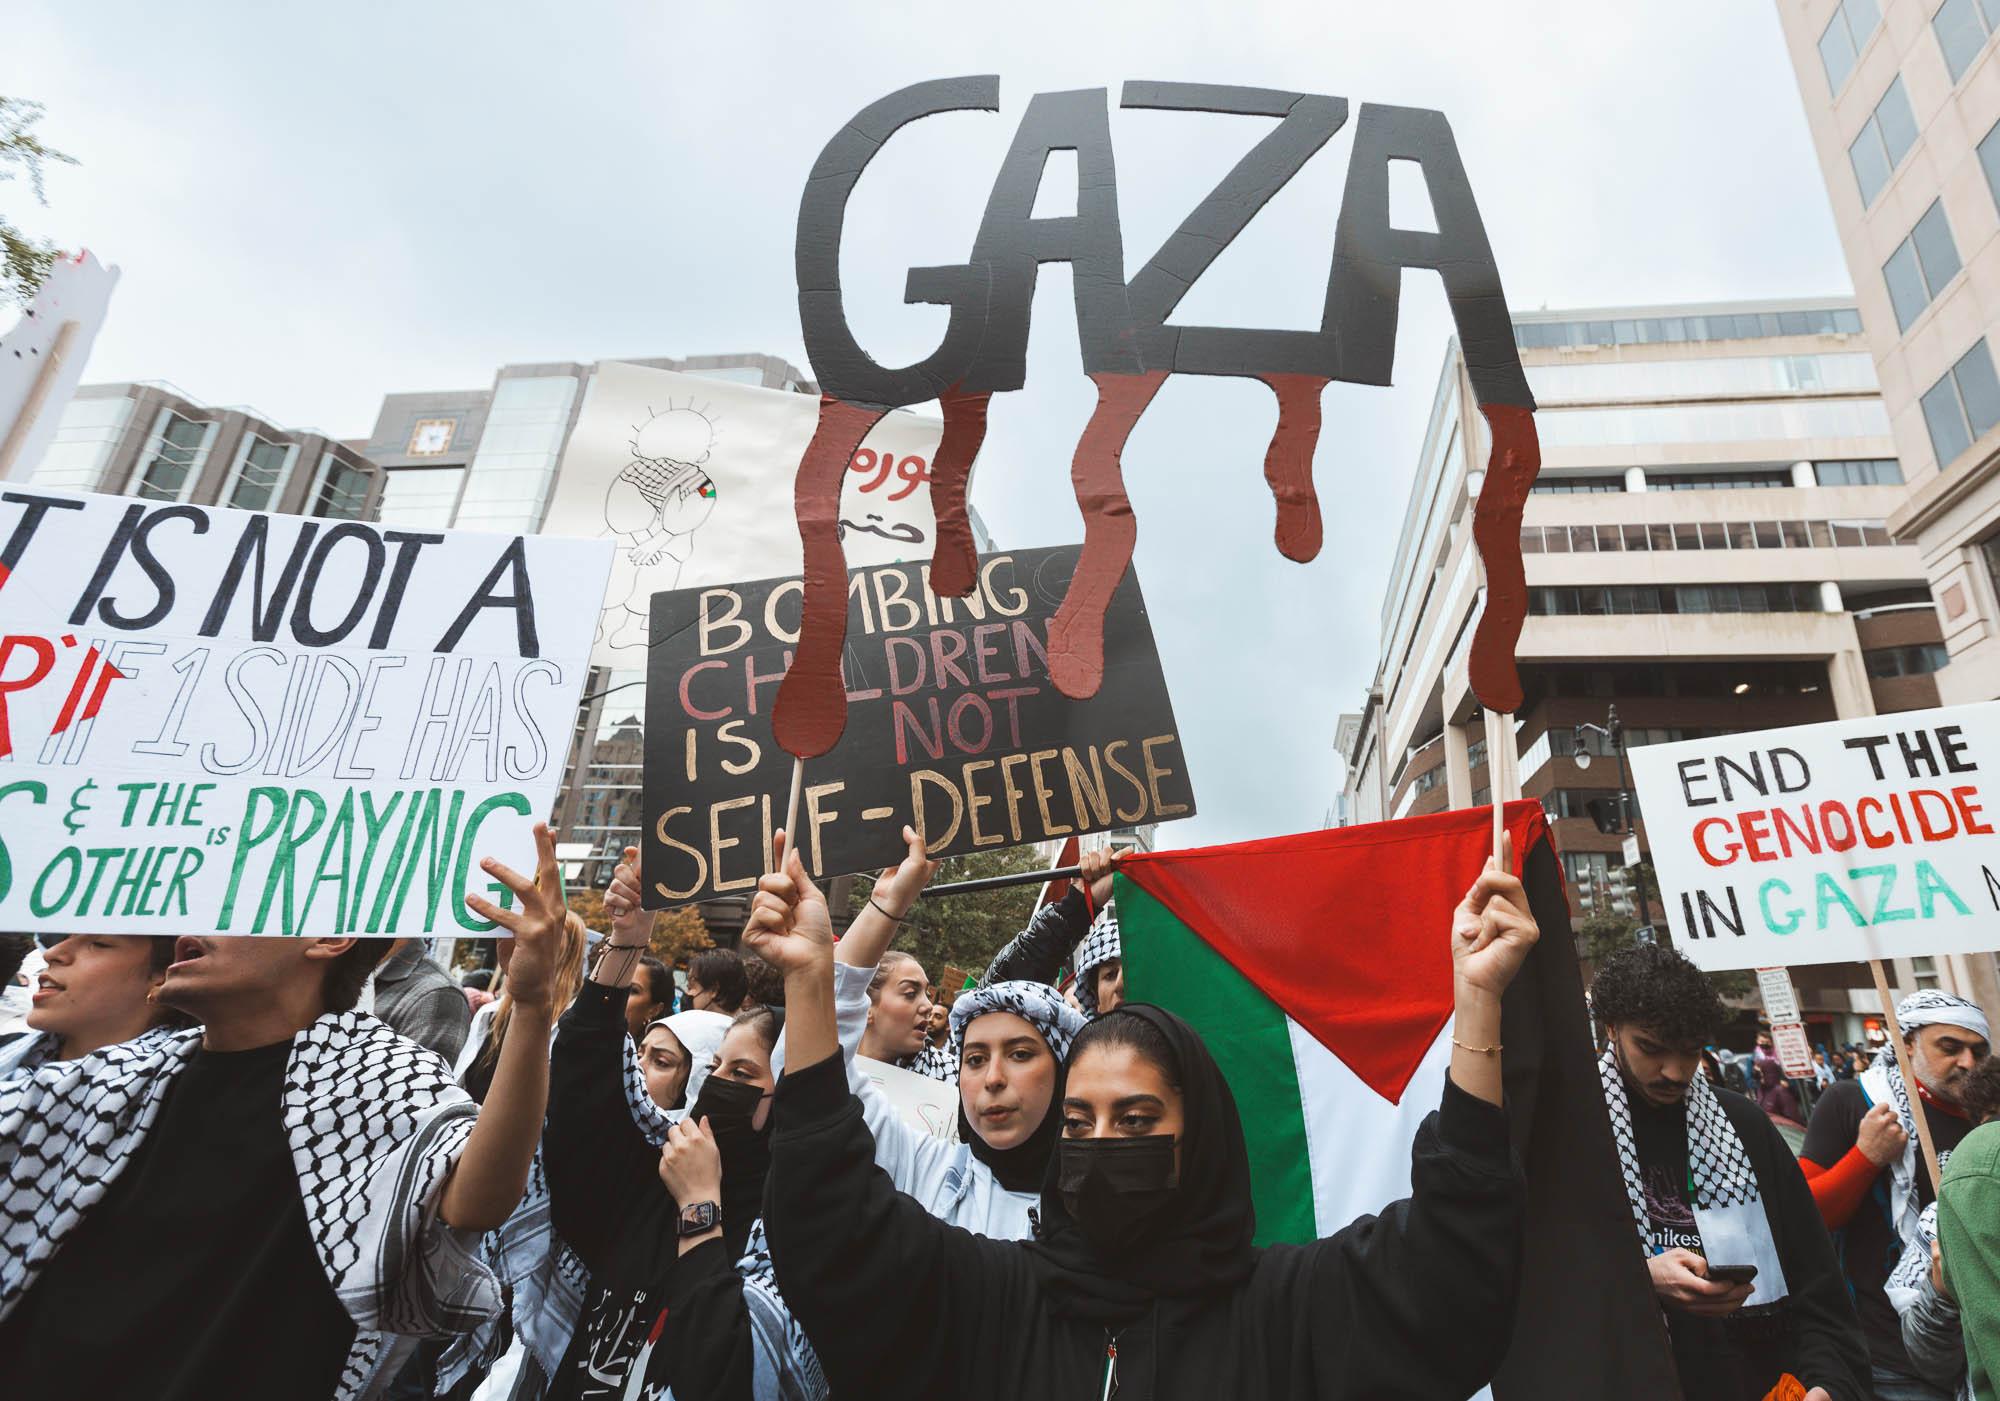 For Gaza: Ceasefire March in Washington D.C. - Pro-Palestinian protesters rallied downtown in...